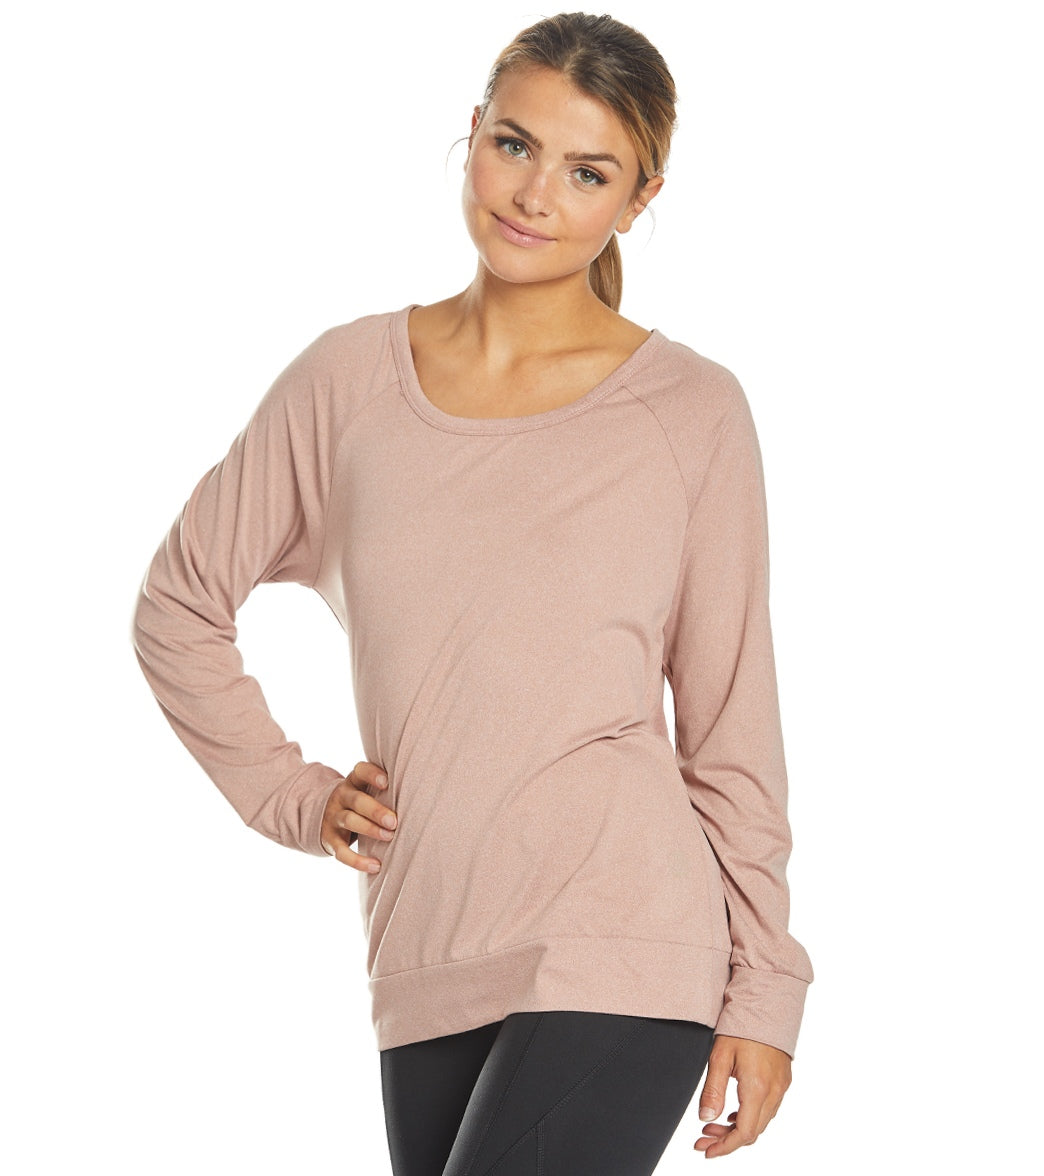 Balance Collection Lively Layering Yoga Top